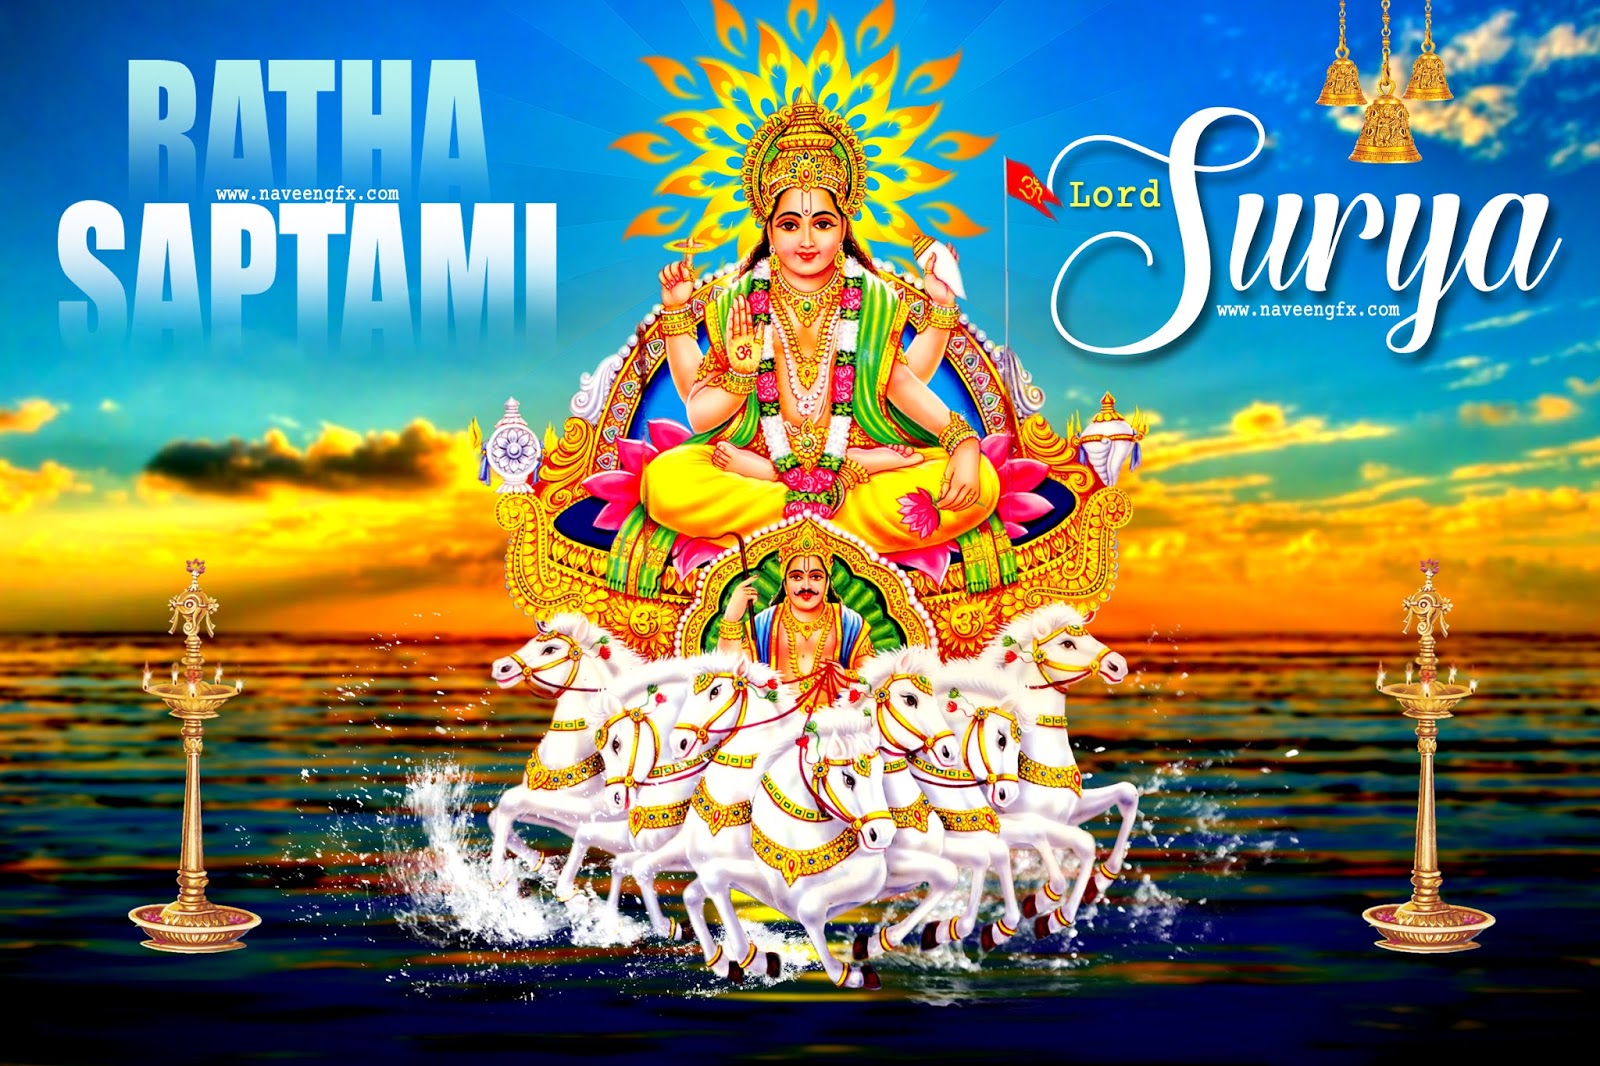 Featured image of post Lord Surya Hd Images Lord shiva hd phone wallpaper lord shiva hd phone wallpaper mobile wallpaper minimal phone backgrounds wallpaper for android and ios wallpaper download lord shiva and maa parvati hd wallpapers collecton 2019 and watch the photo gallery of god shiv ji maa parvati and shri ganesh ji